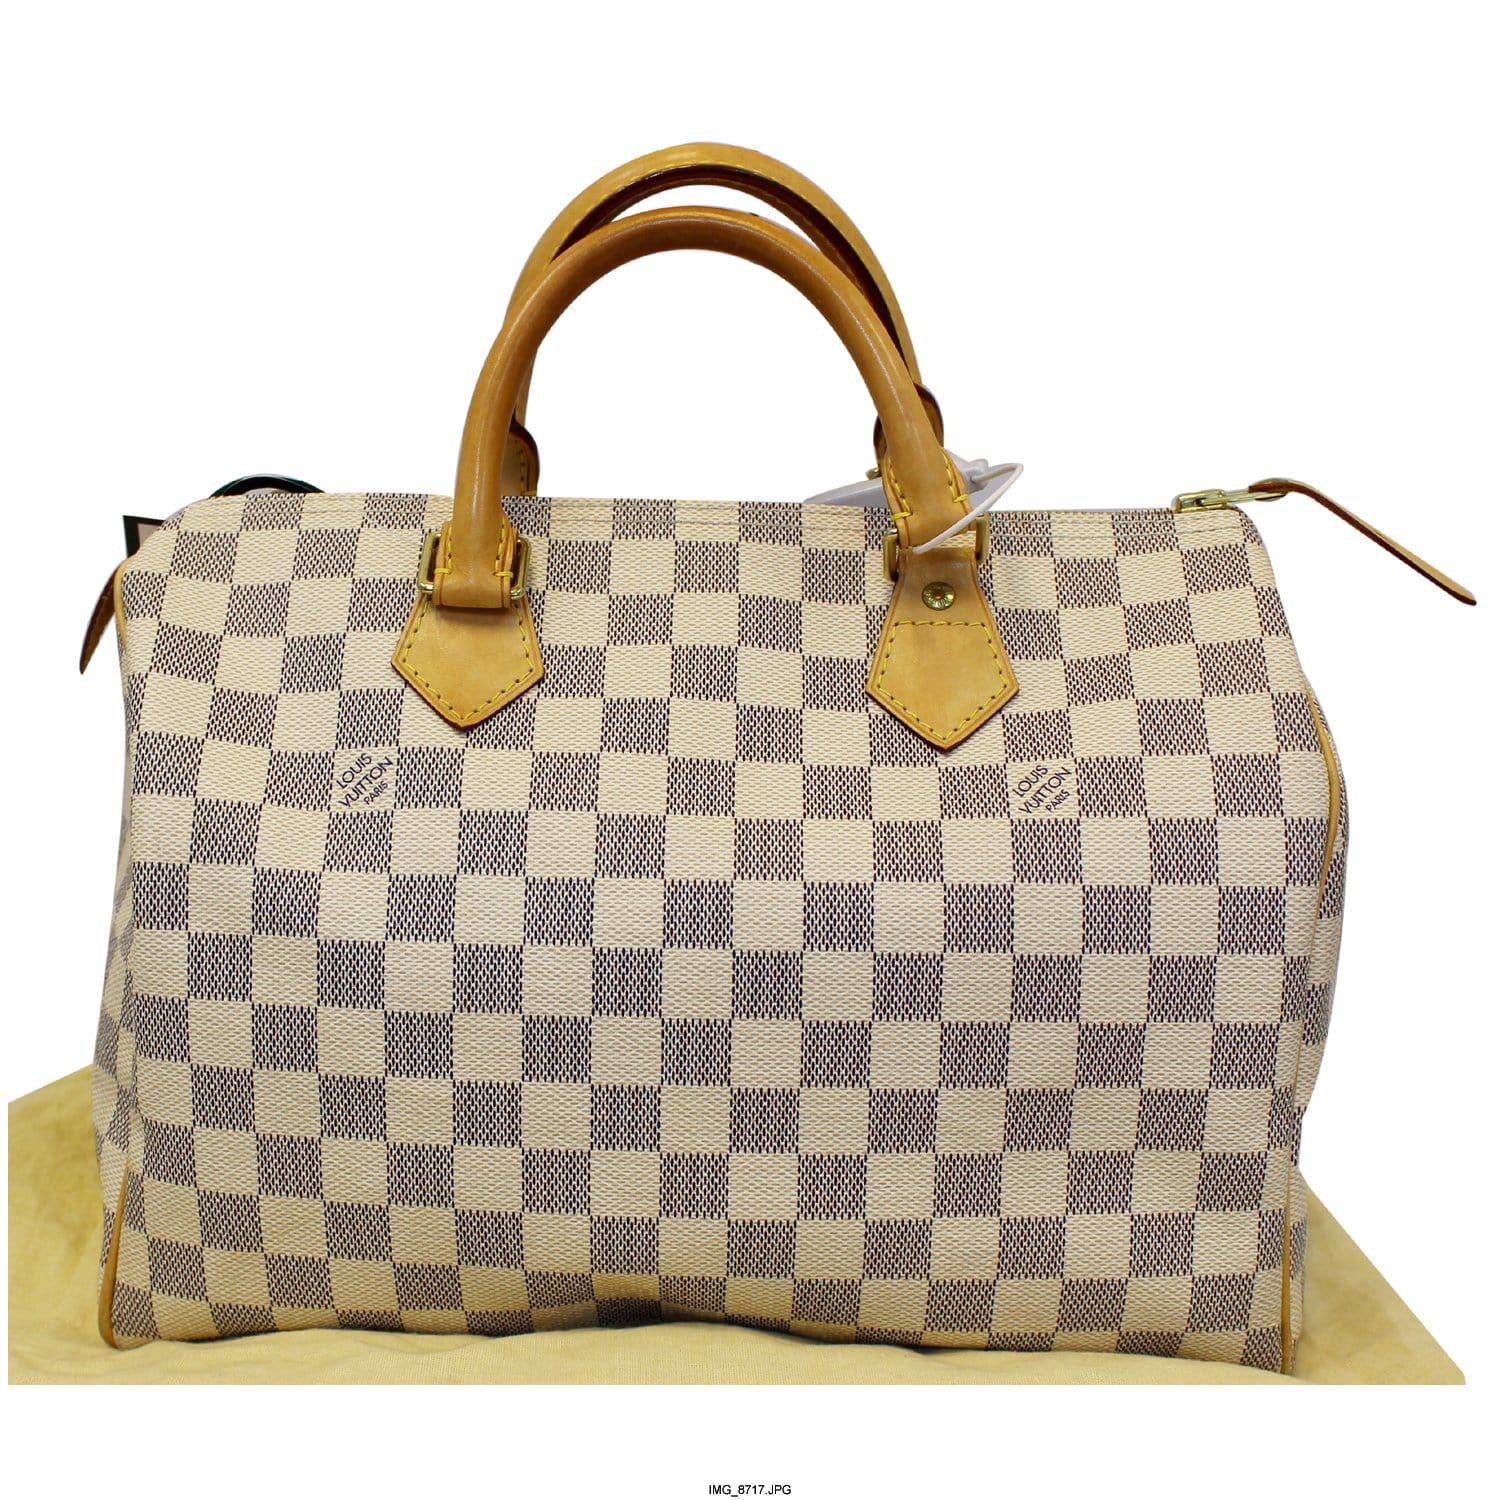 What Is The Biggest Louis Vuitton Speedy Bag | IQS Executive